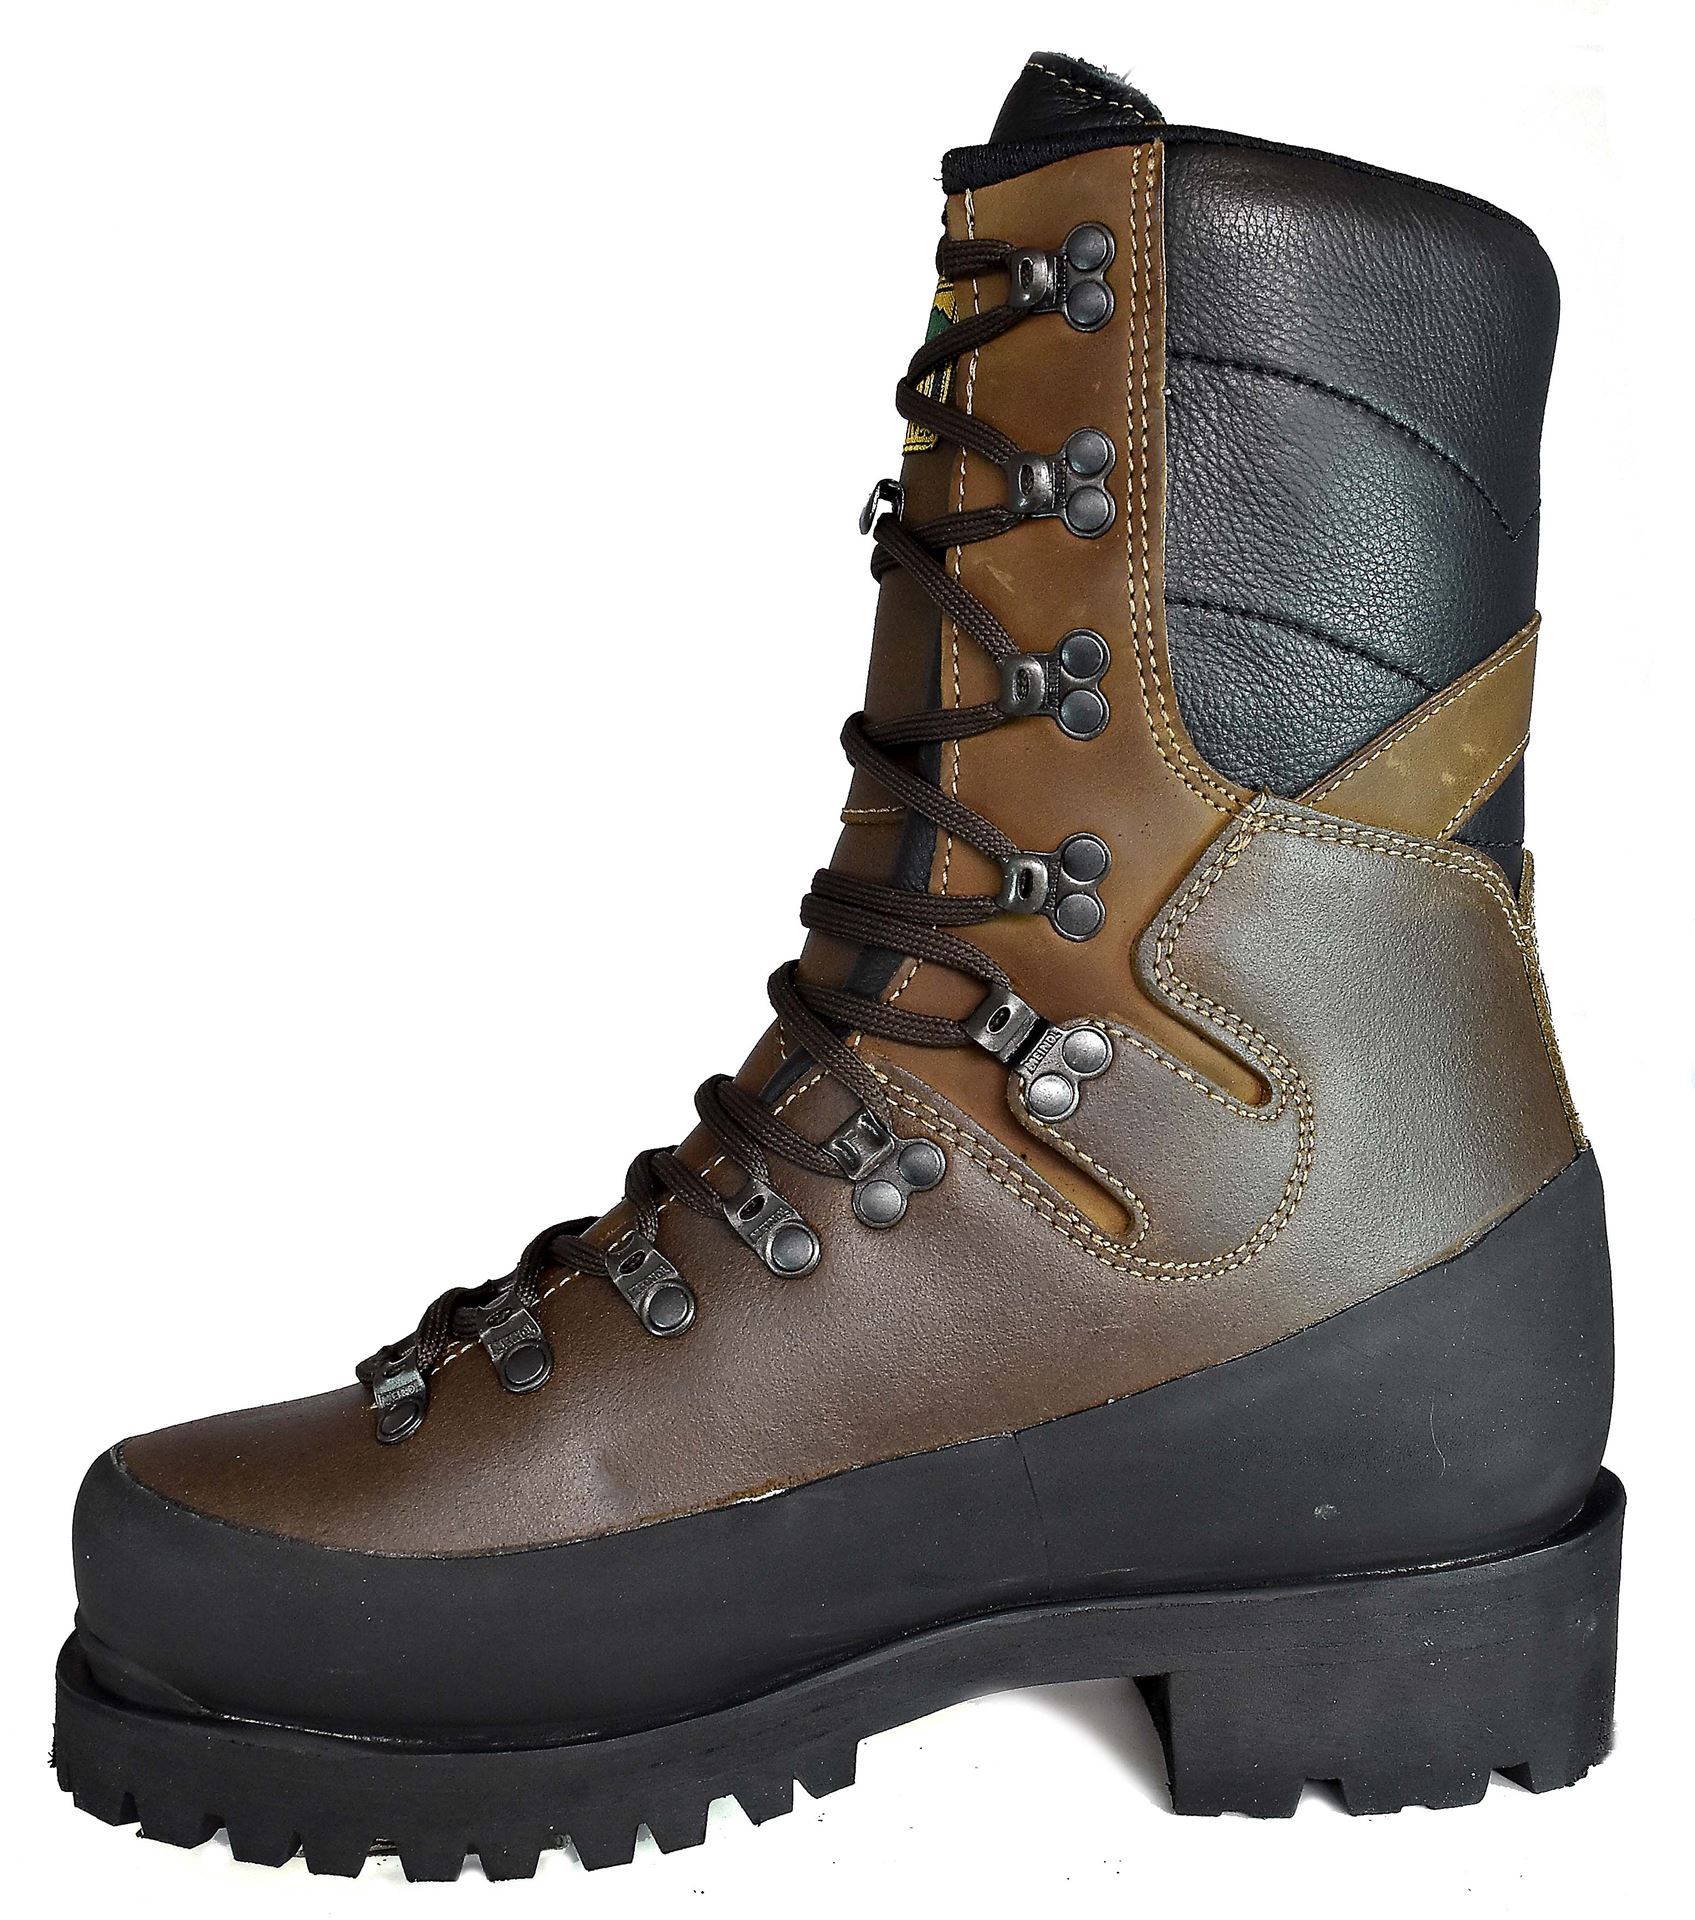 10 Duraline Leather Lineman Boots - Hoffman Boots - For all your Boot Needs